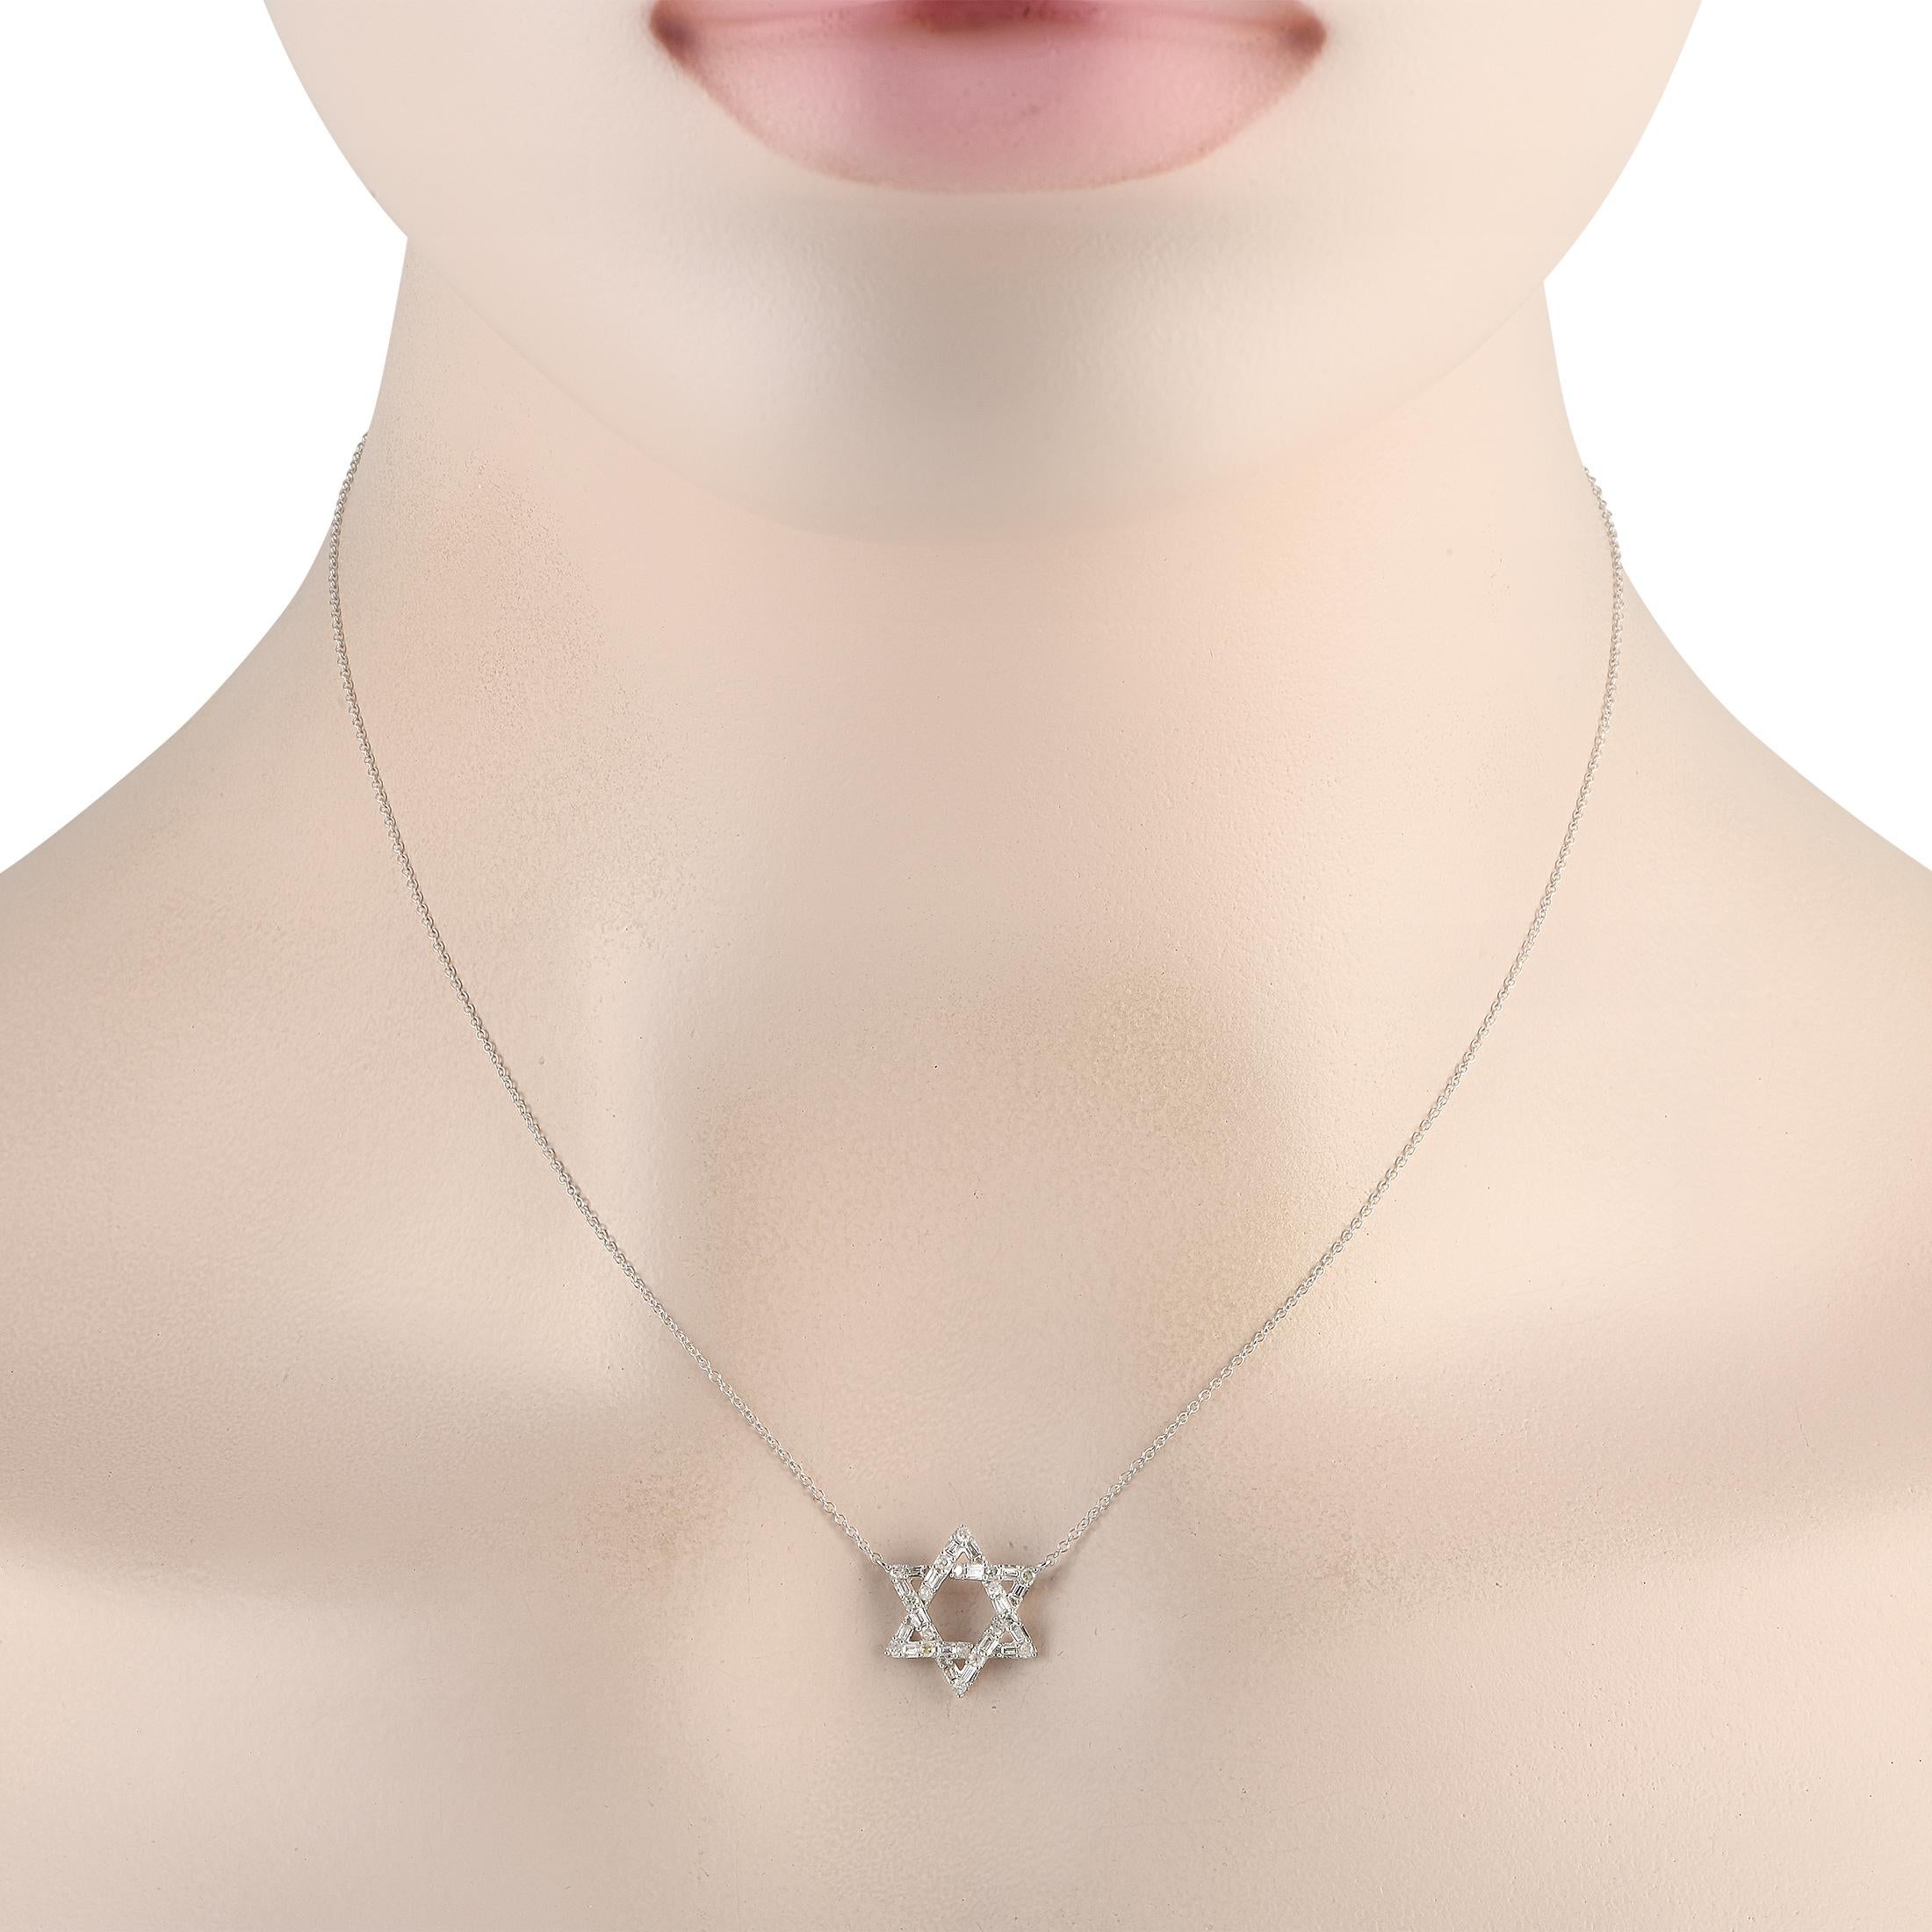 This luxurious necklace is a beautiful way to put your faith on display. Suspended at the center of a delicate 16 chain, this piece features a Star of David pendant measuring 0.50 round. Sparkling diamonds with a total weight of 0.28 carats further